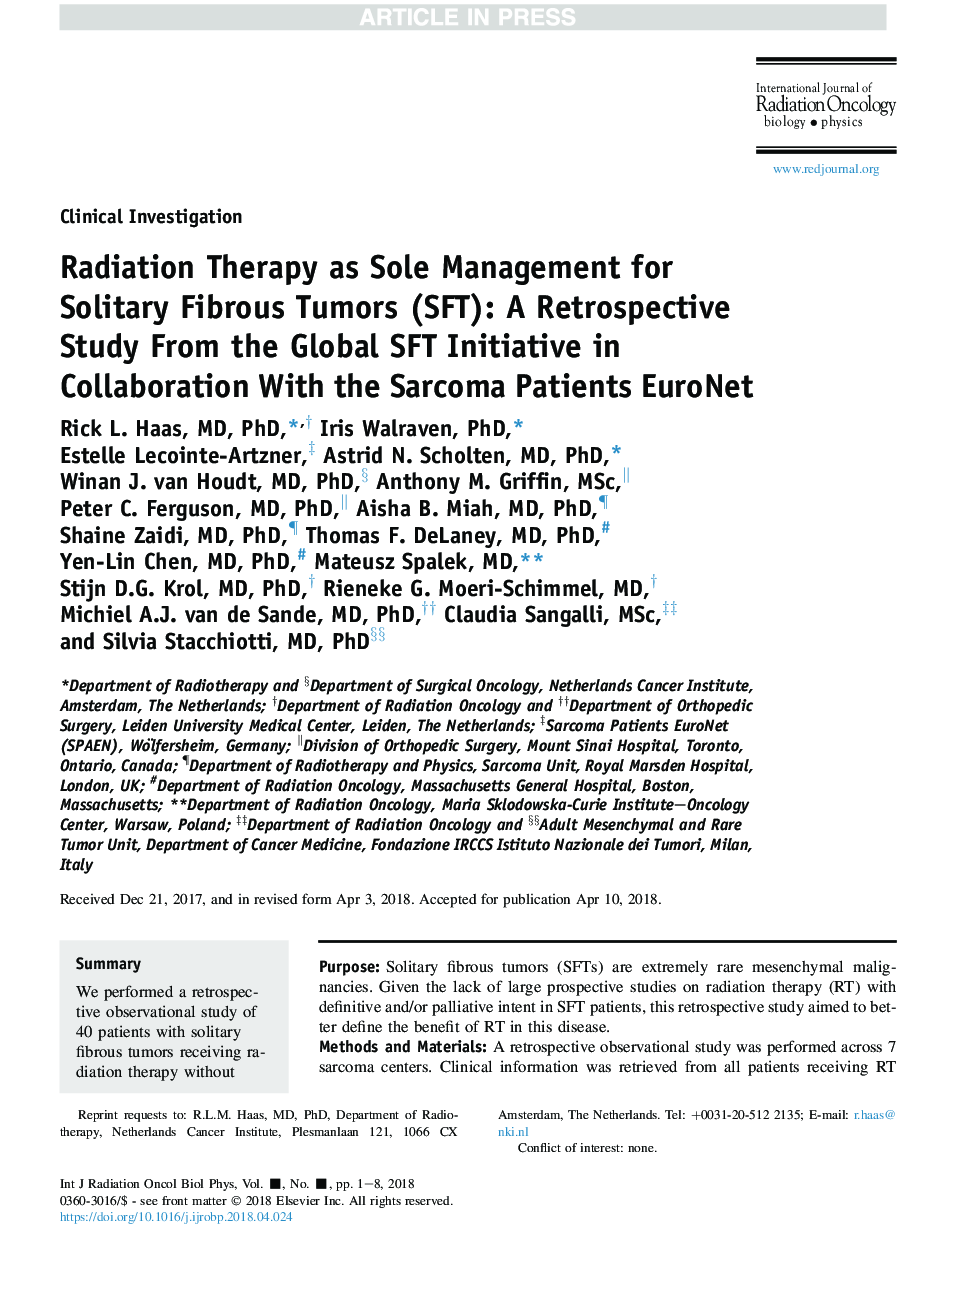 Radiation Therapy as Sole Management for Solitary Fibrous Tumors (SFT): A Retrospective Study From the Global SFT Initiative in Collaboration With the Sarcoma Patients EuroNet